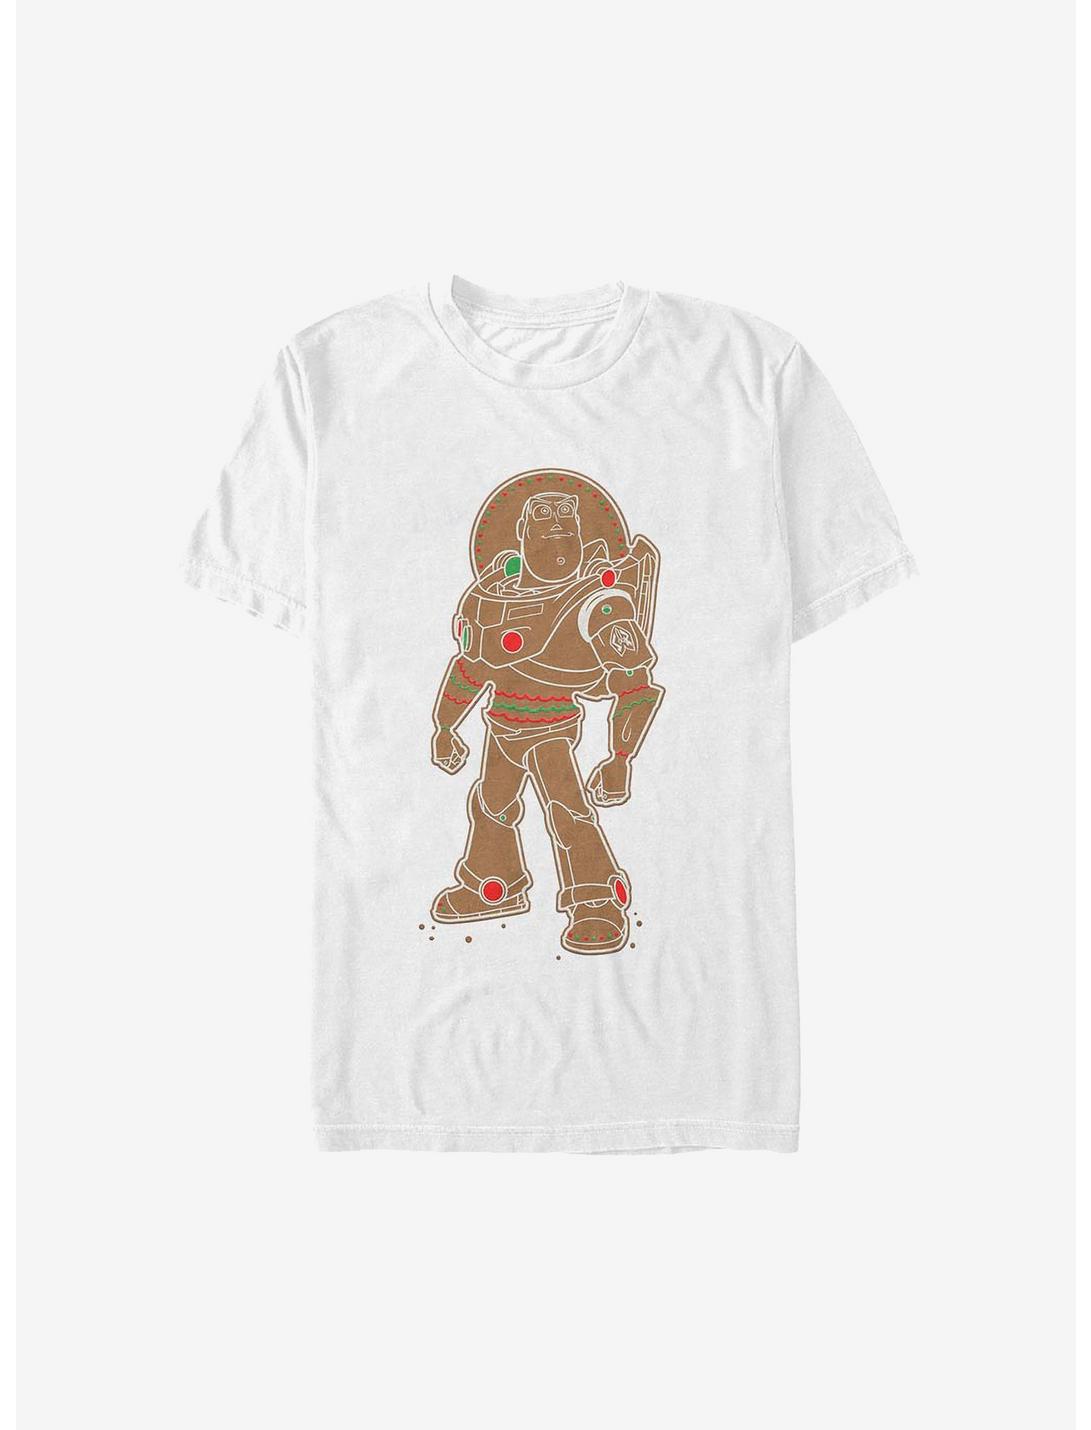 Disney Pixar Toy Story Gingerbread Buzz Holiday T-Shirt, WHITE, hi-res